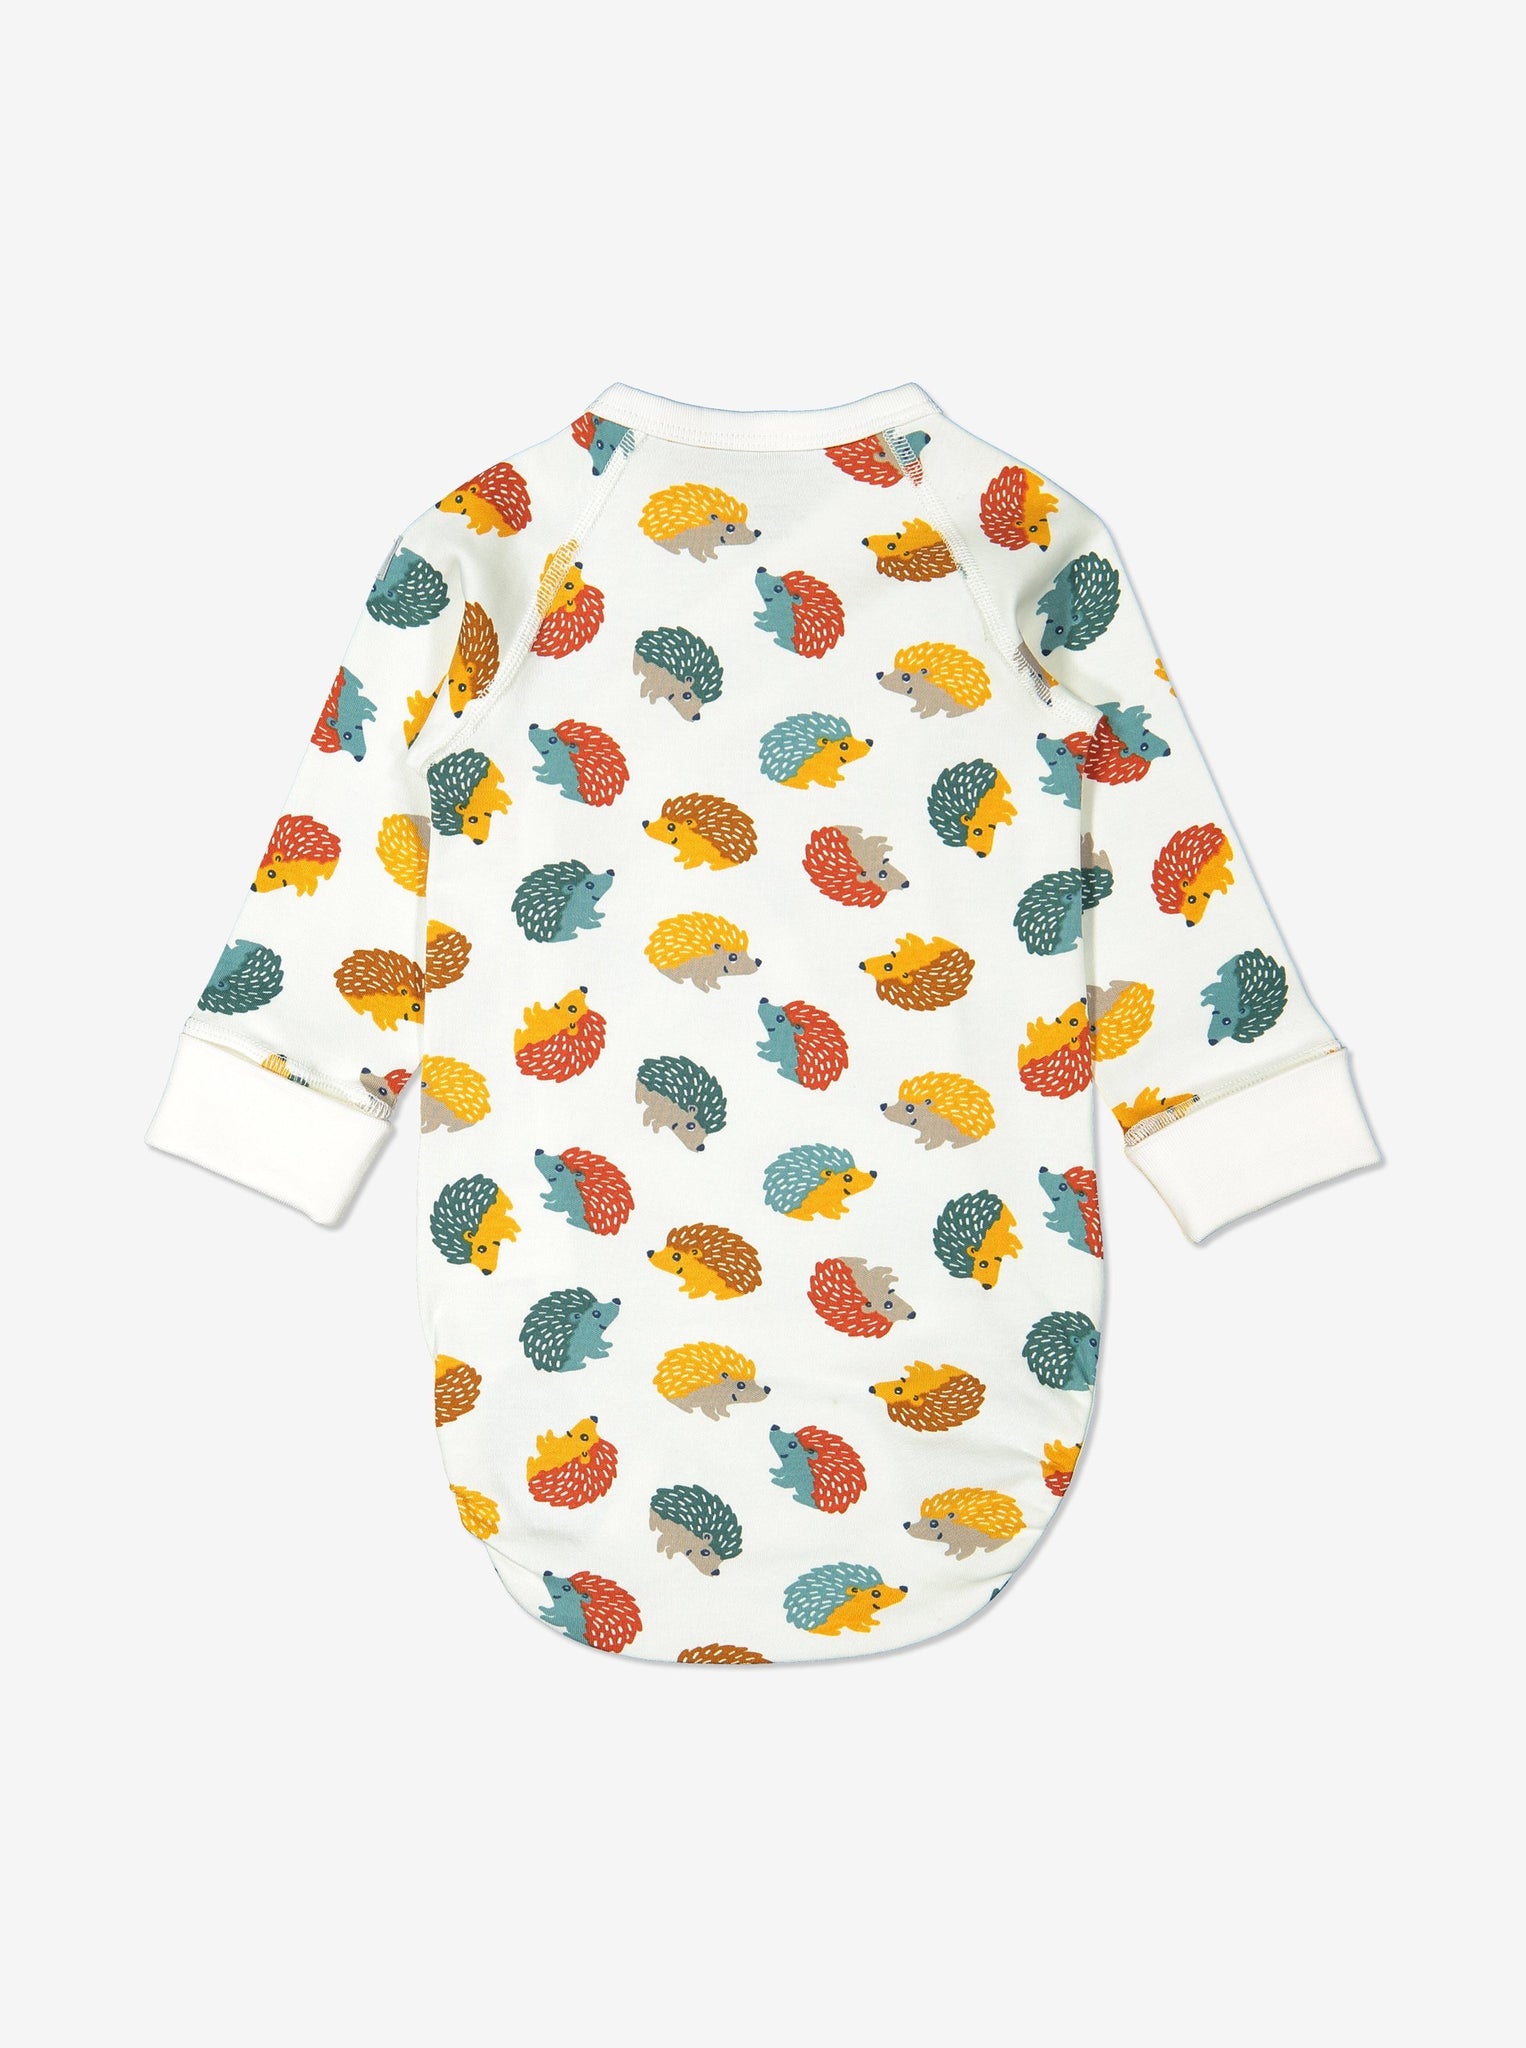 Back view of hedghog print babygrow for newborn babies in a wraparound style, made from 100% organic cotton fabric